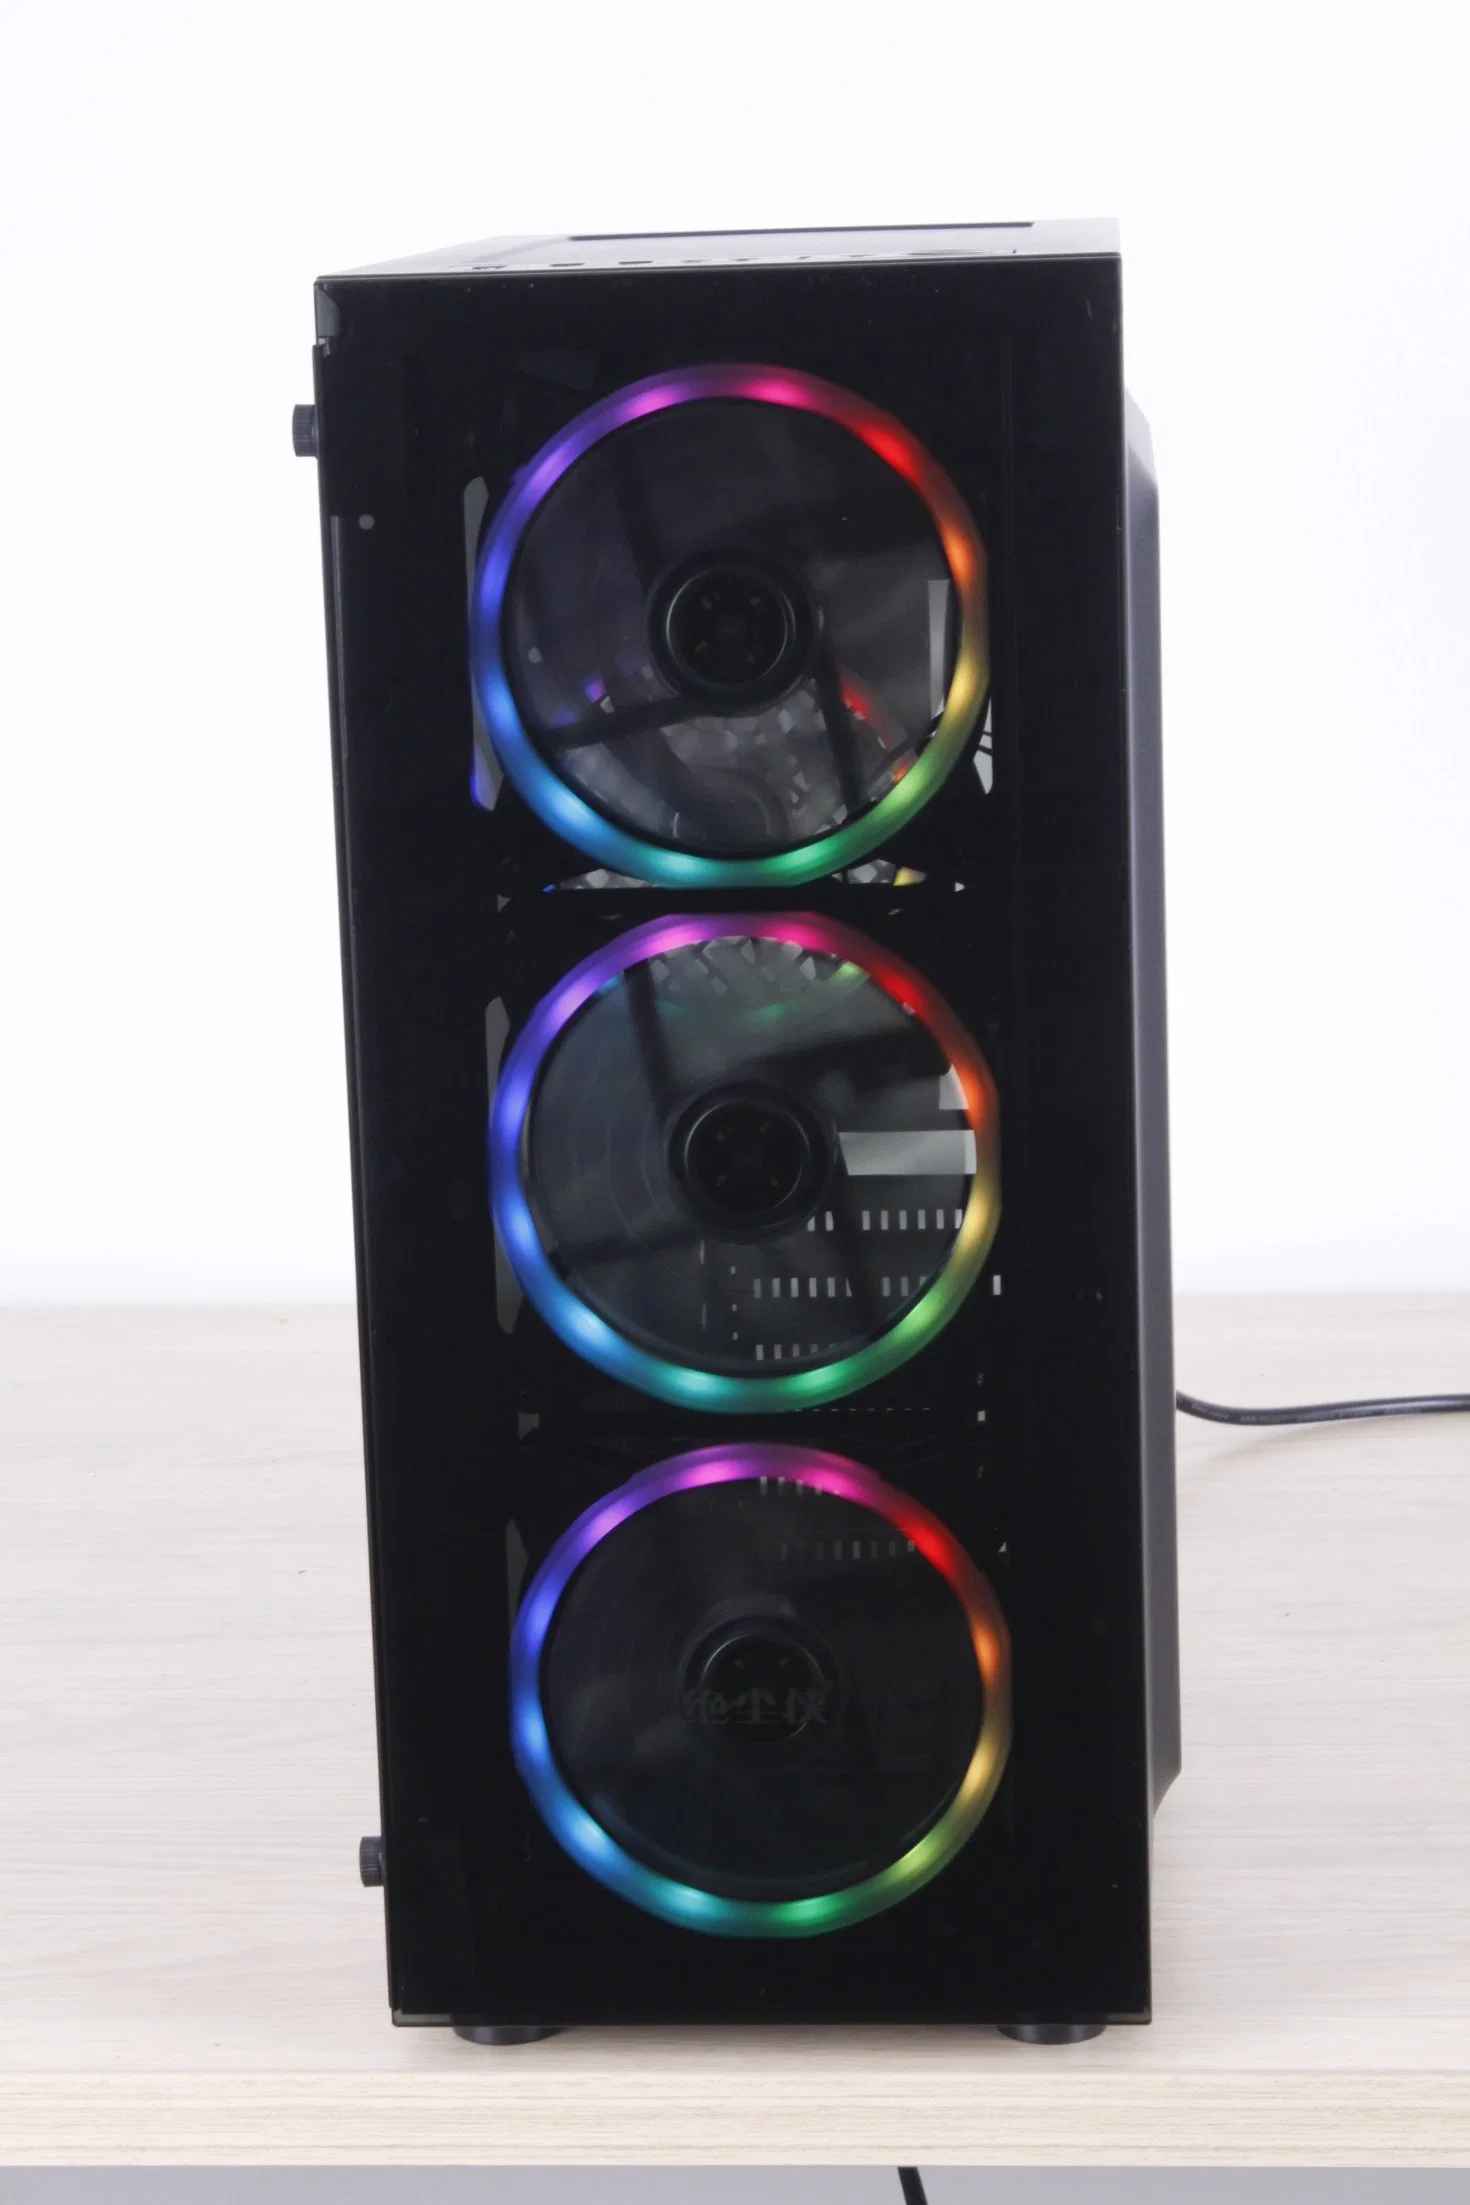 Office Tower PC Case Hot-Selling ATX Gaming Case with RGB Fans